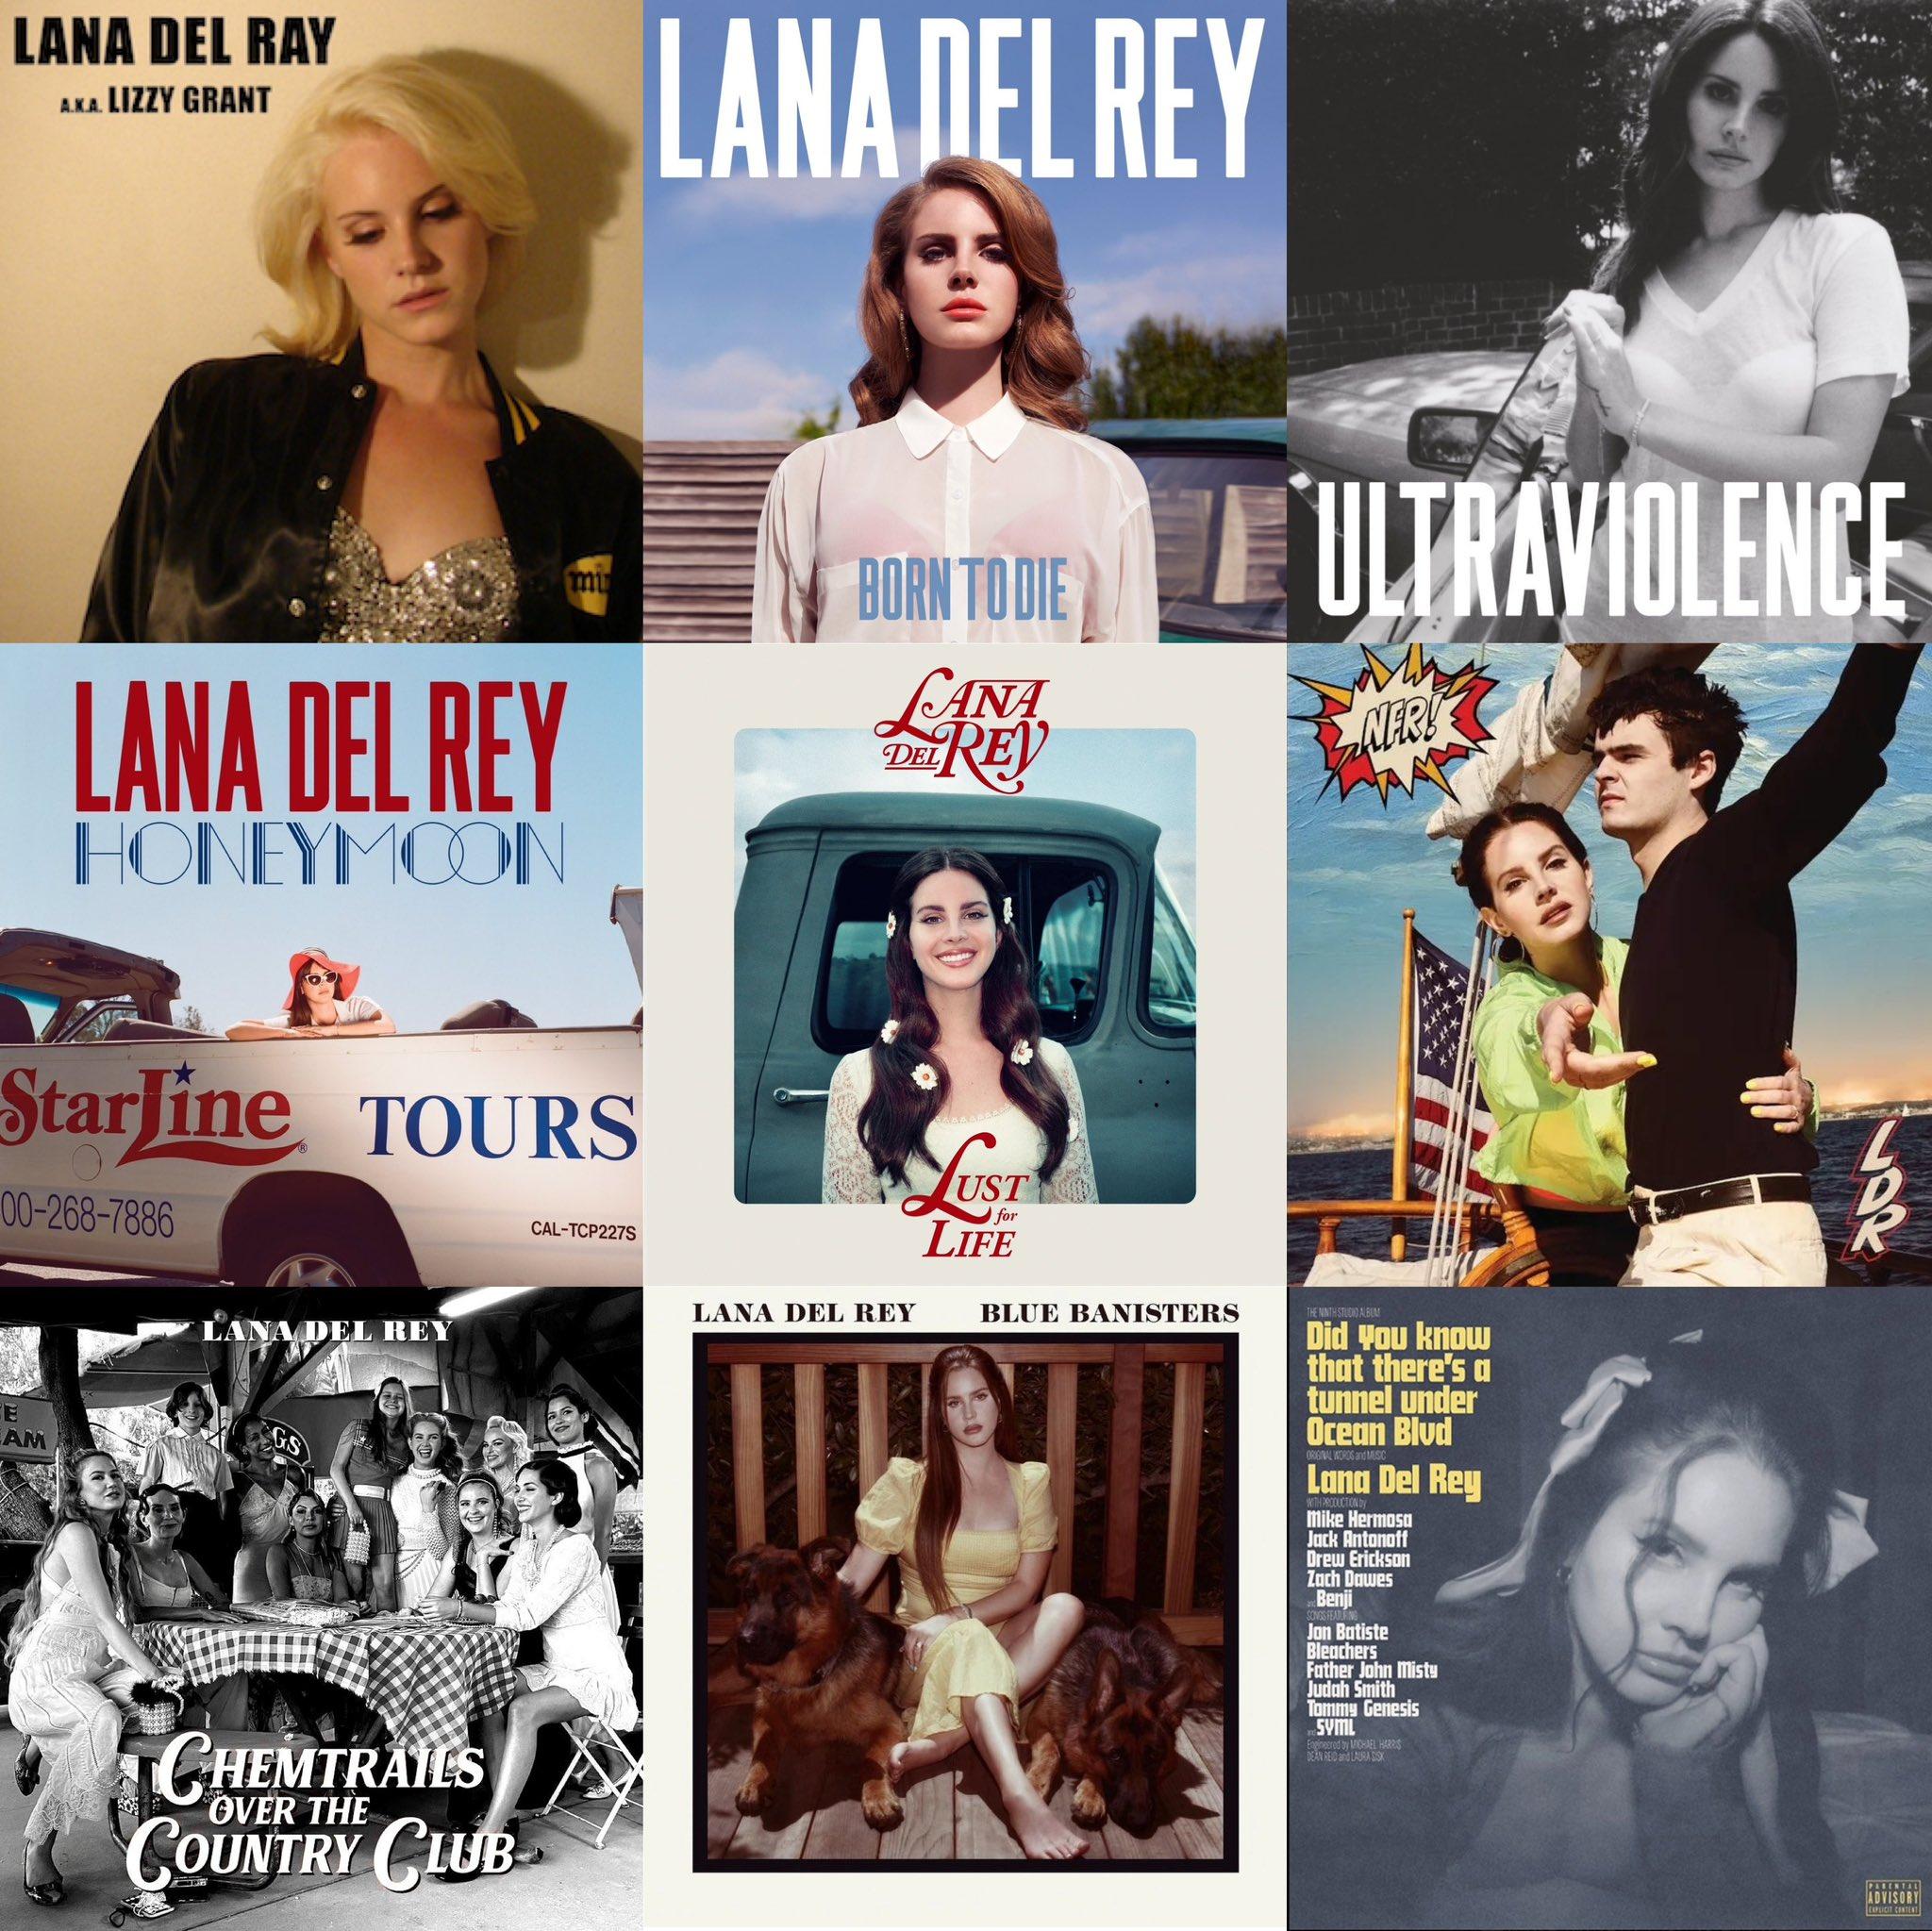 Pop Base on What are your Top 3 favorite Lana Del Rey